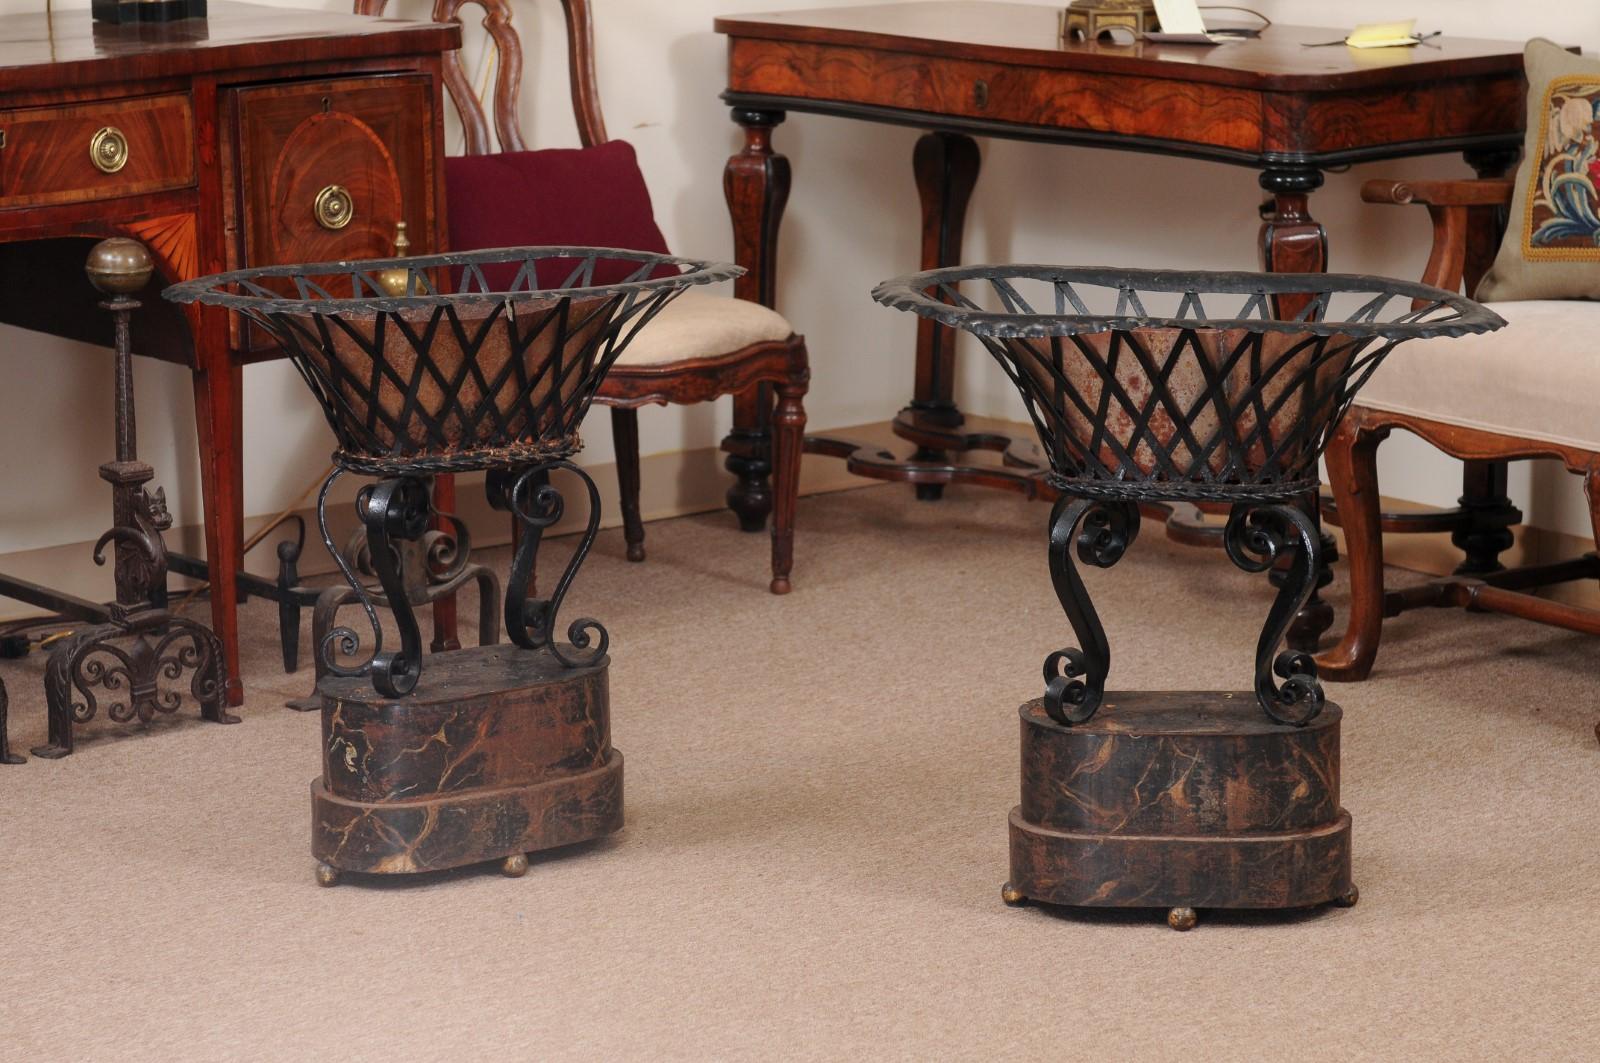 Pair of Black Painted Tole & Iron Planters with Scroll Detail, 19th Century France.